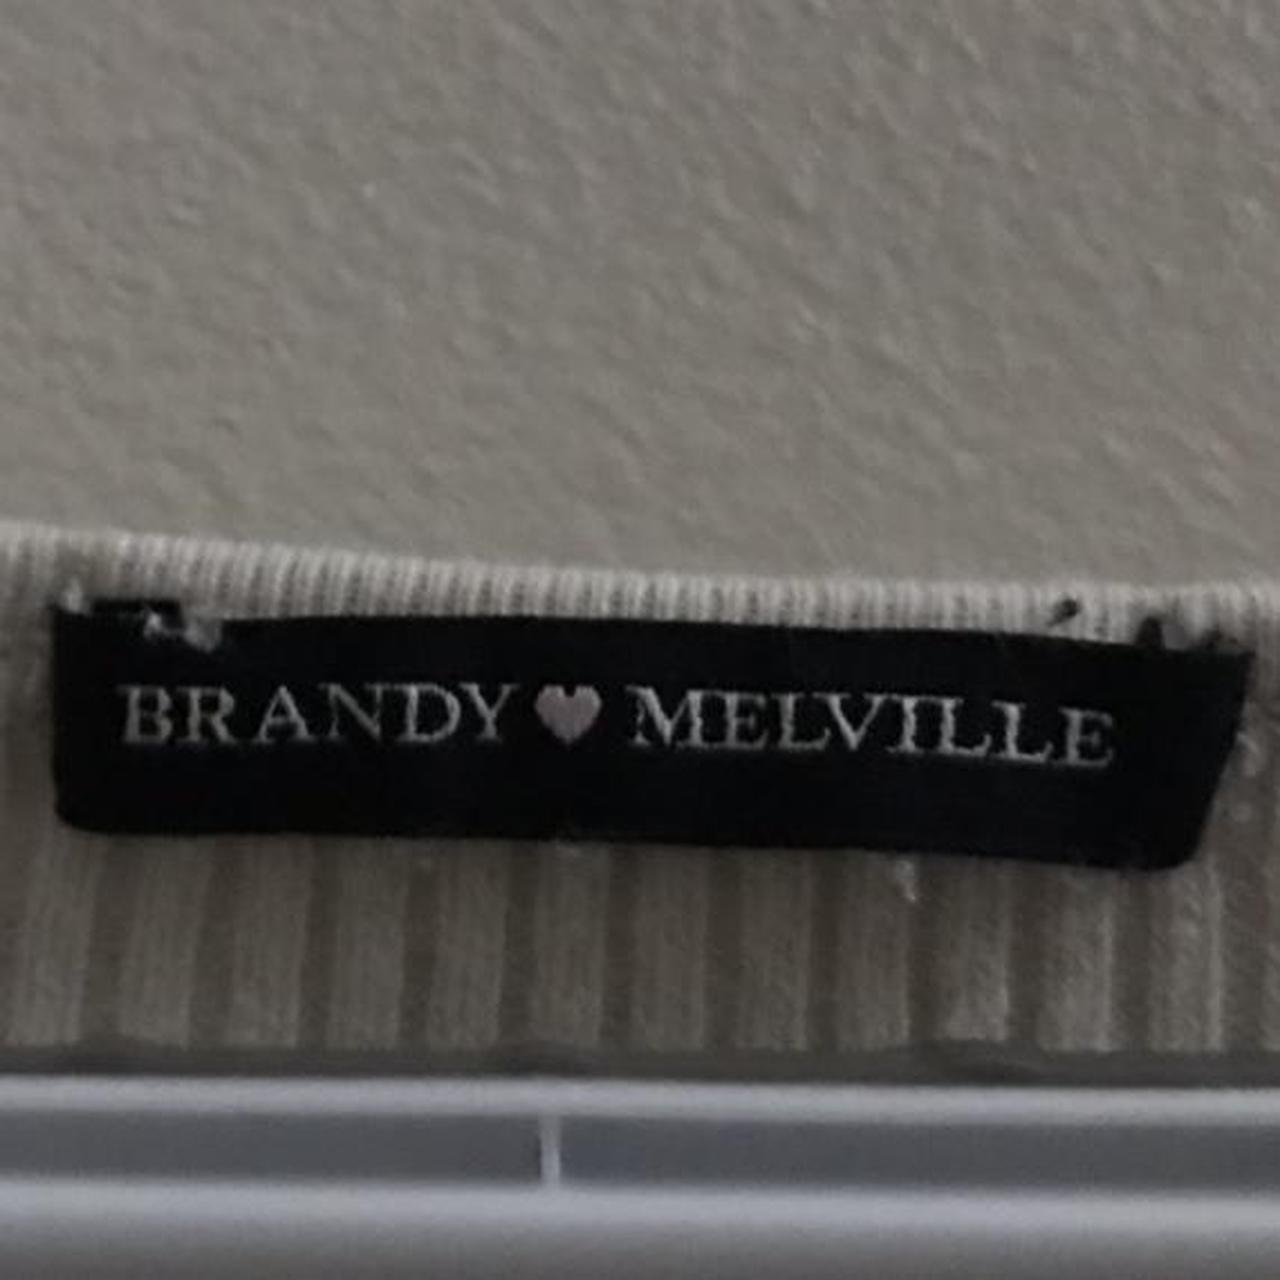 Brandy Melville ribbed zelly top. the color is cream